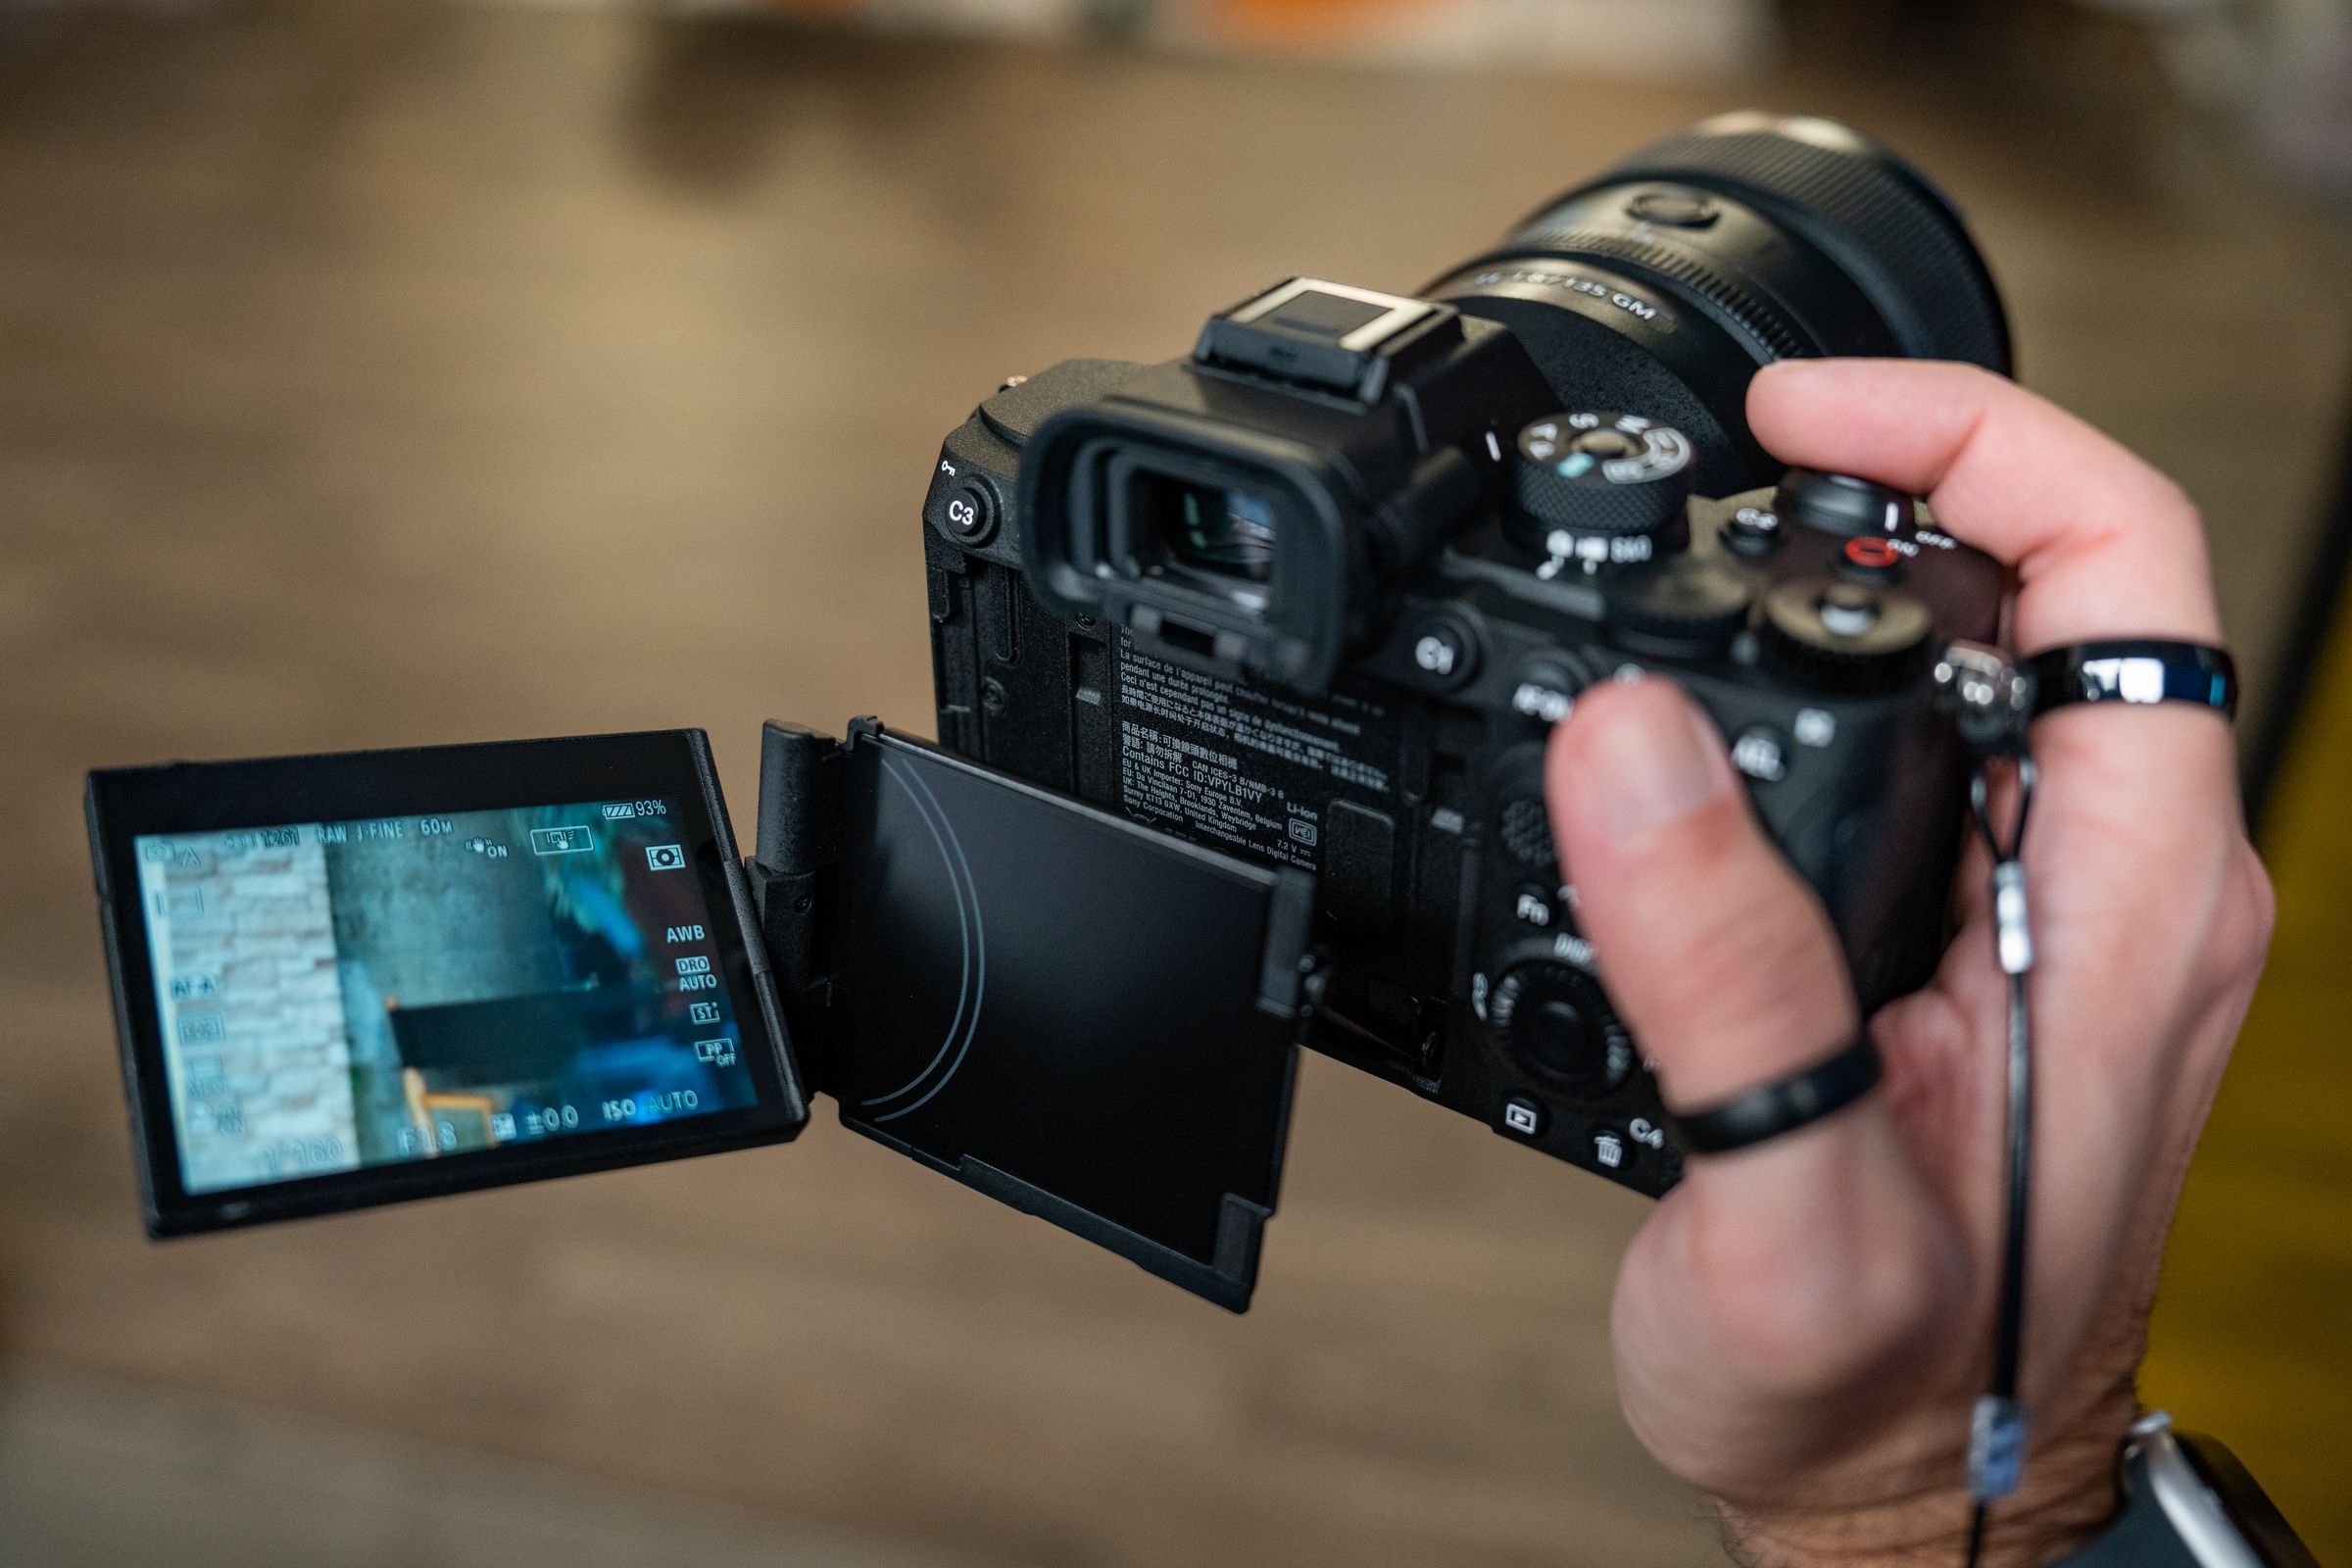 The rear screen swivels and swivels like many other cameras, but also tilts up or down.  It allows for many more angles of use and is much quicker to deploy for quick firing from the hip or overhead compared to models that only deploy to the left.